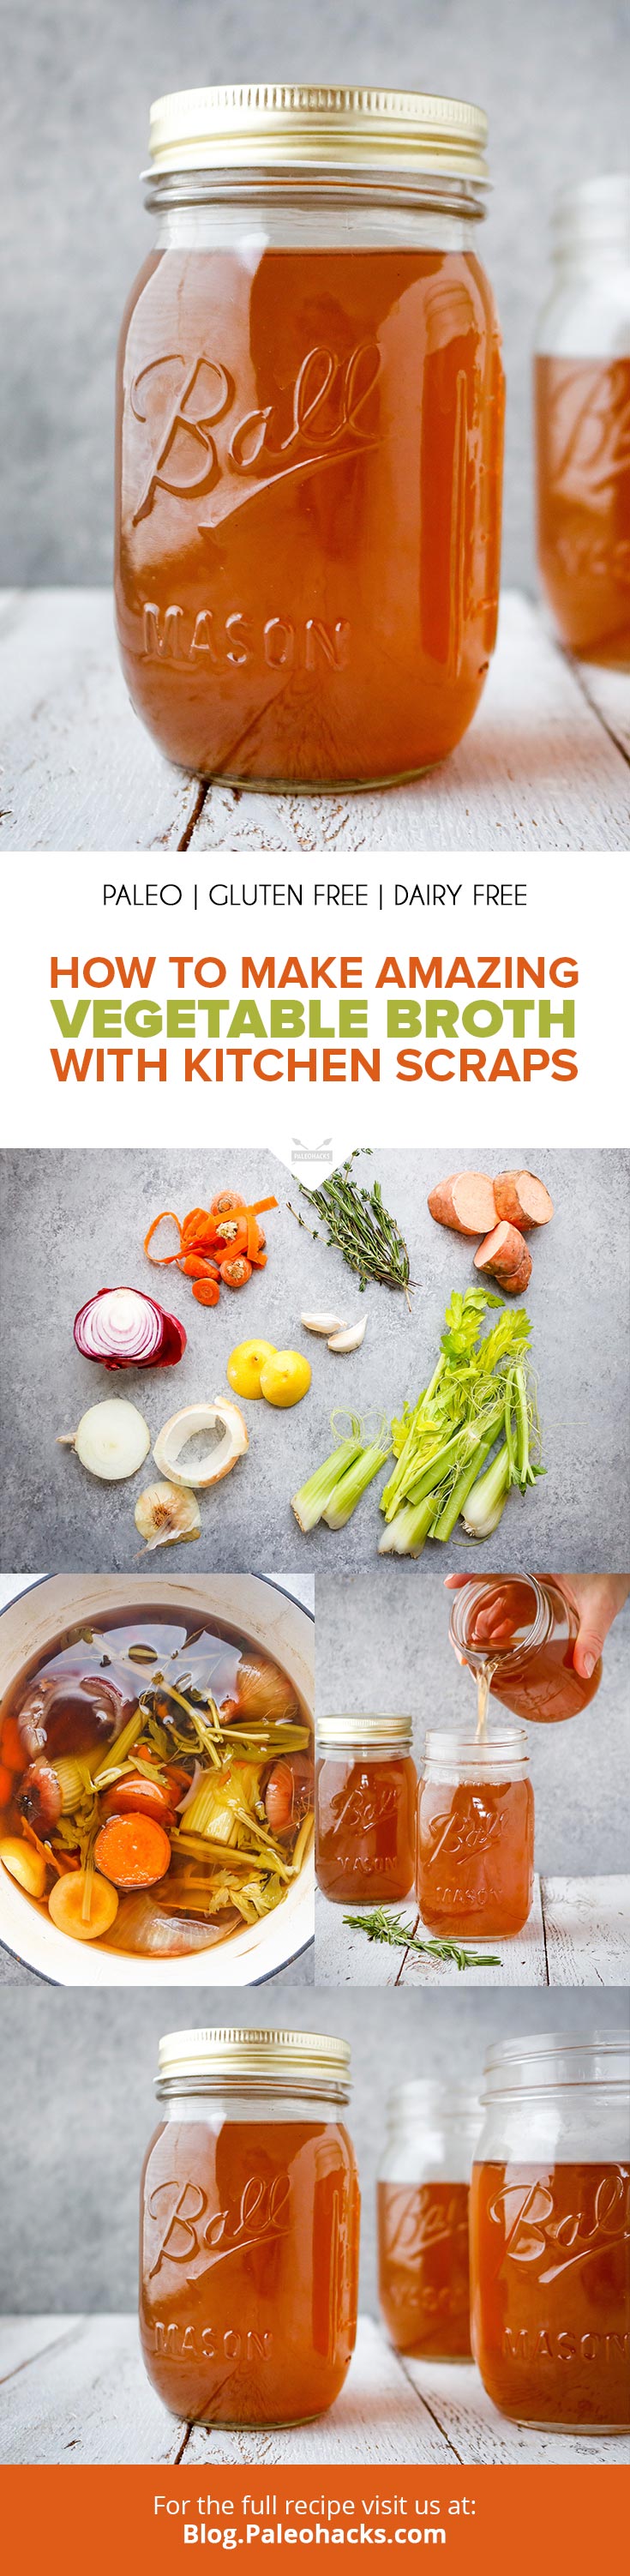 Repurpose those ends, skins, and scraps for an out-of-this-world vegetable broth bursting with vitamins and flavor. Save money and boost your health at the same time!